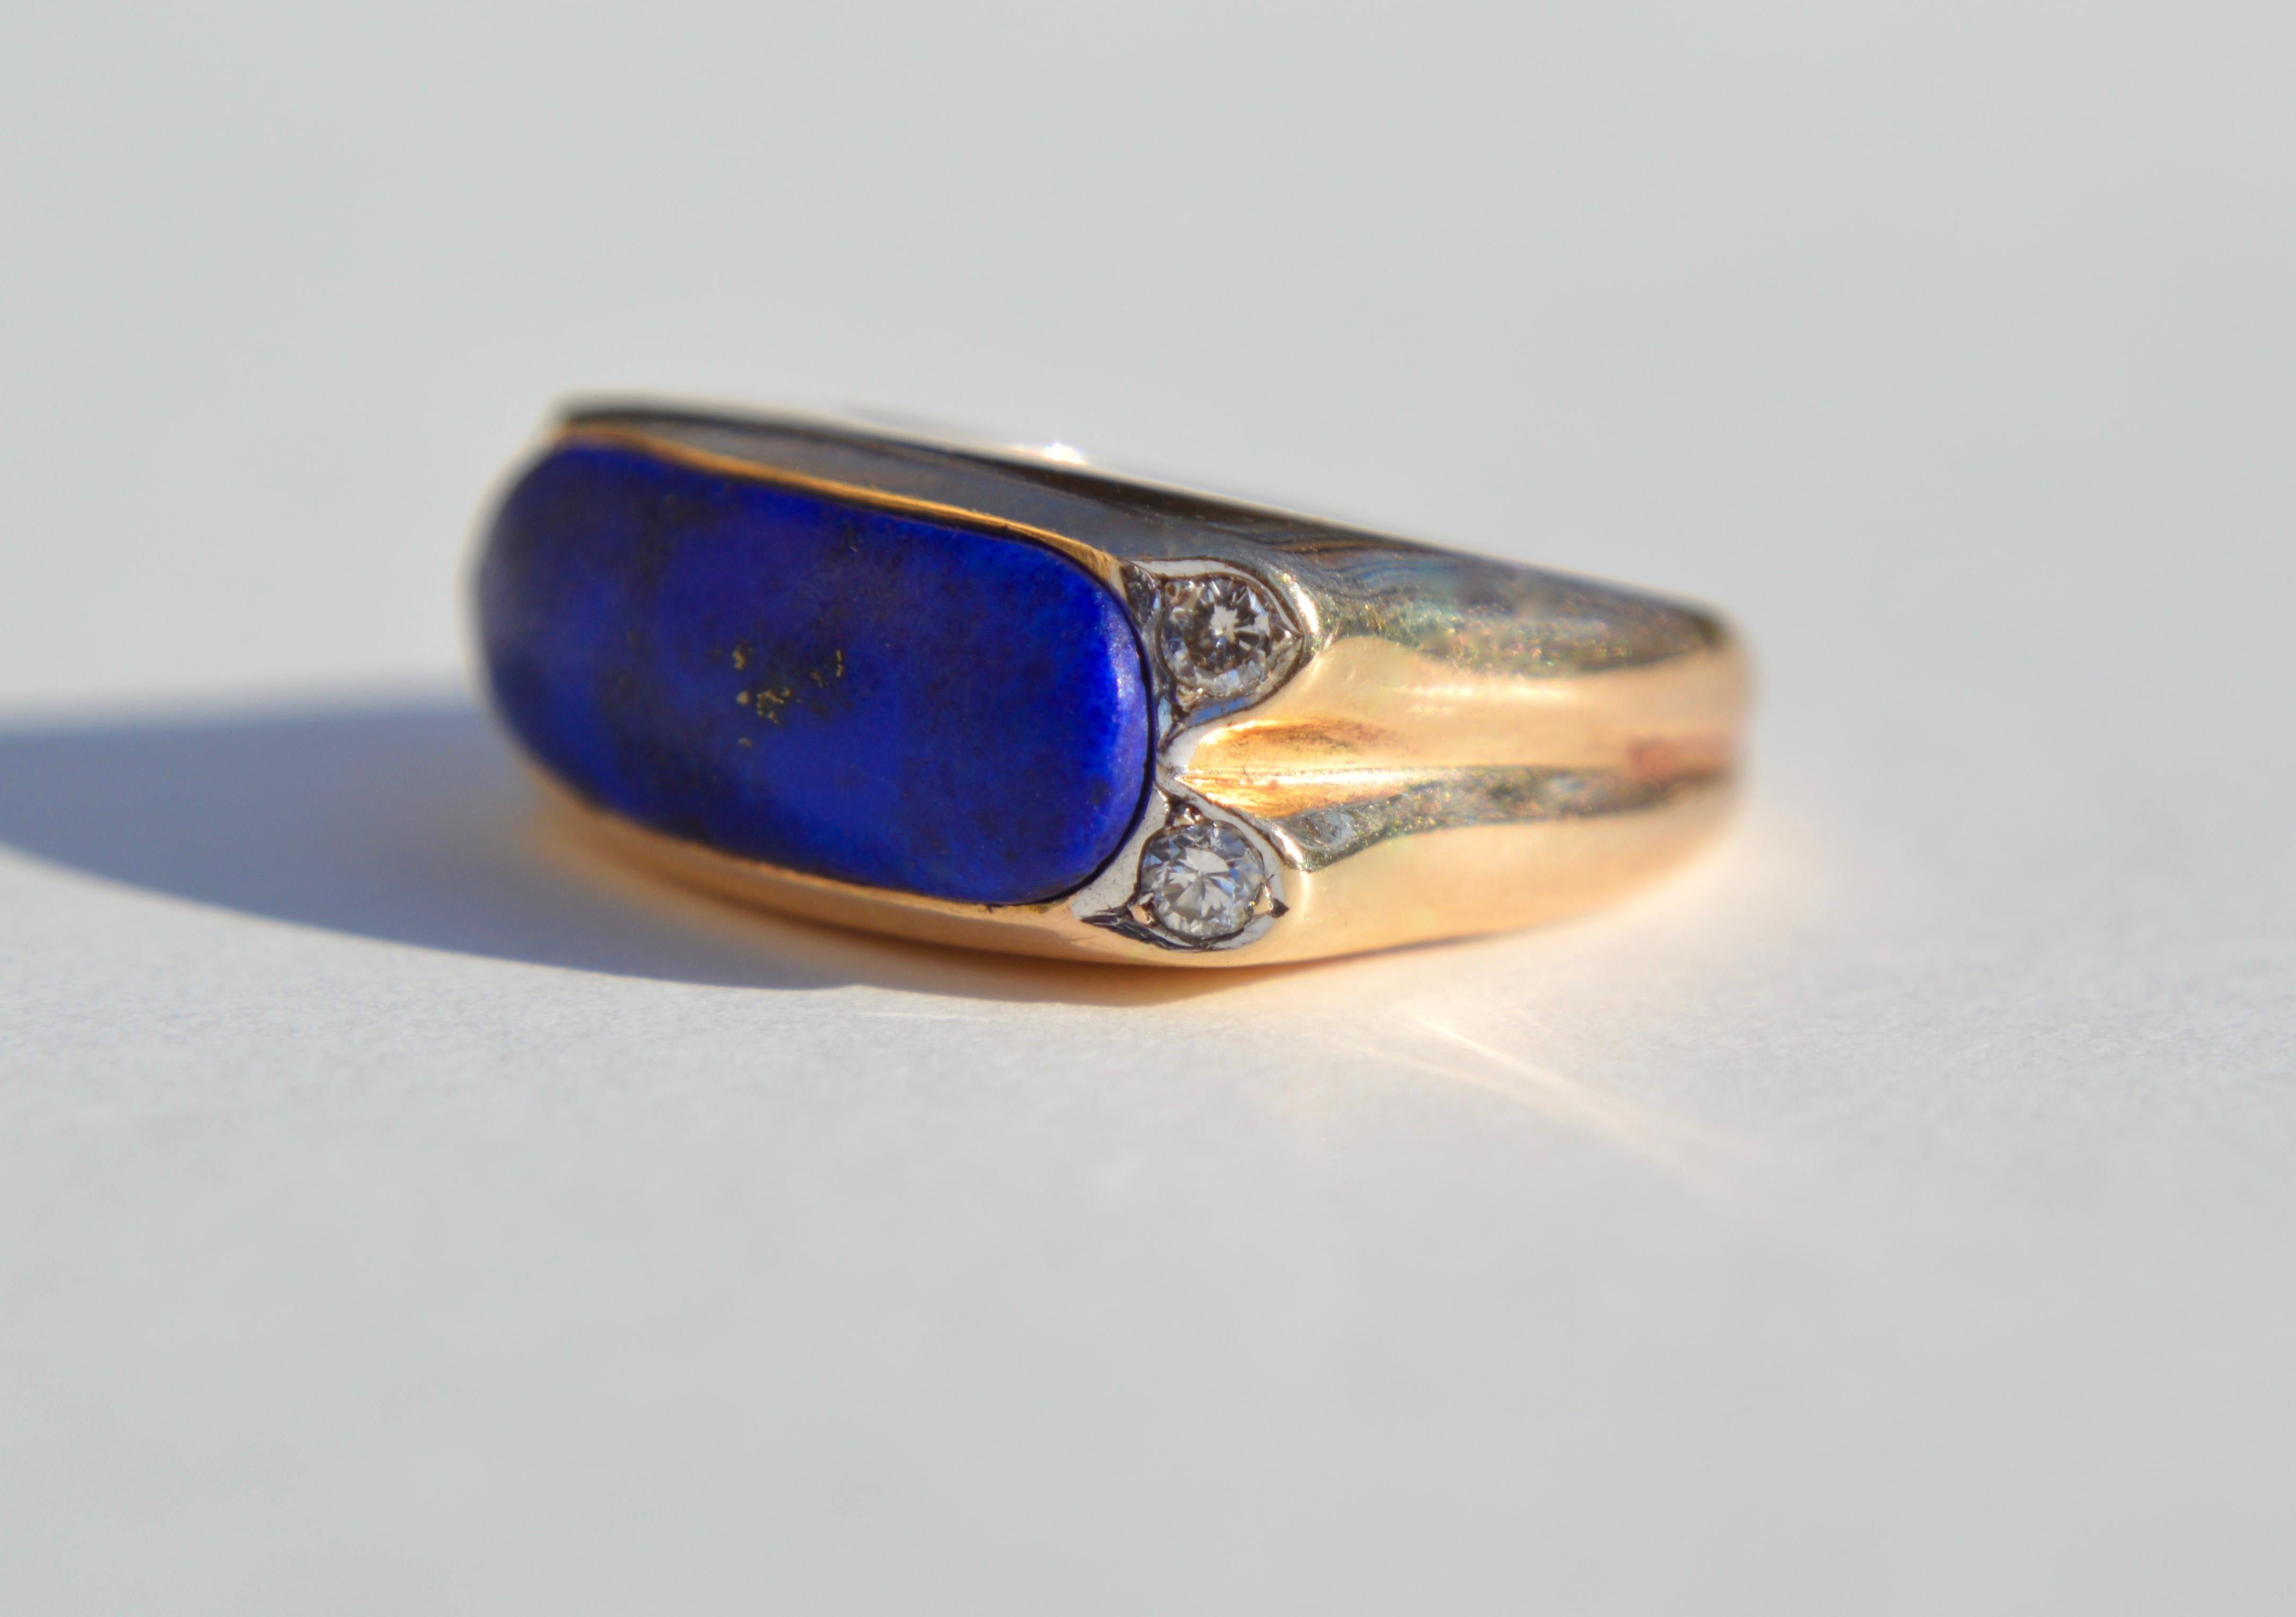 Gorgeous vintage circa 1960s lapis lazuli 14K yellow gold ring with diamonds. Size 5.75 can be resized by a jeweler, in good condition, slight wear to the lapis. 4 single cut diamonds each 2mm in diameter (.03 carat each). Lapis east west cabochon